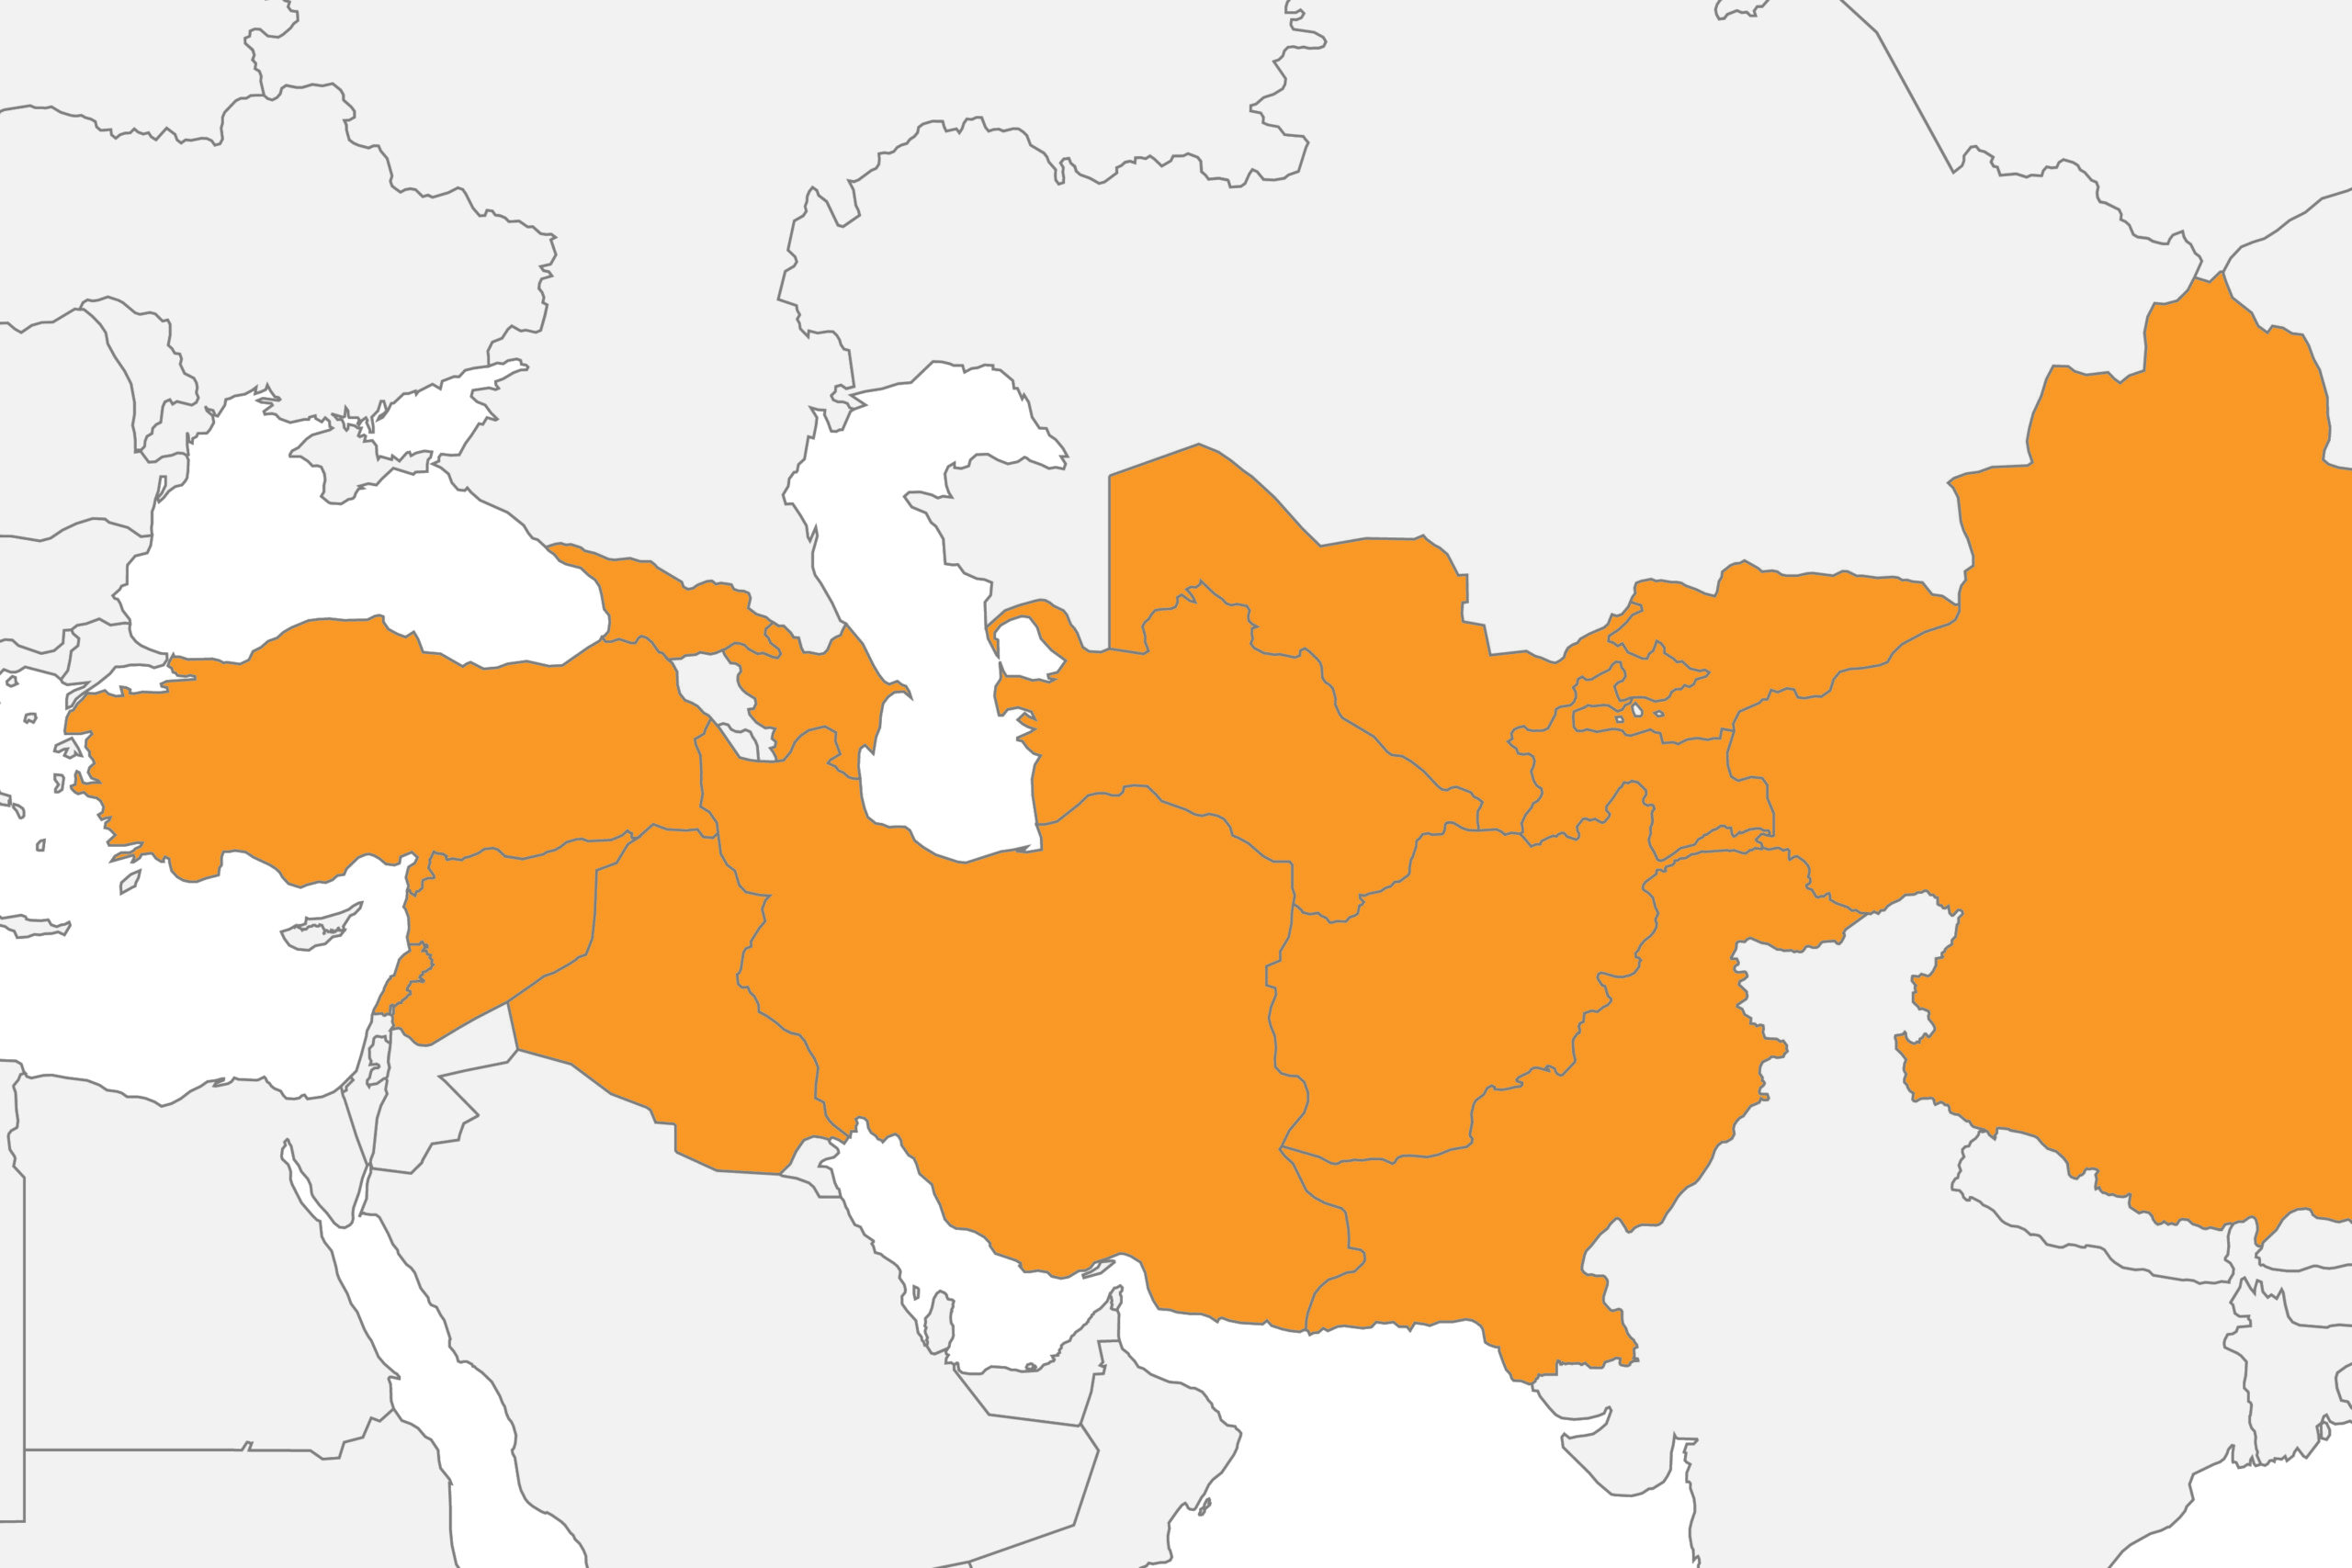 Map of the Silk Road countries